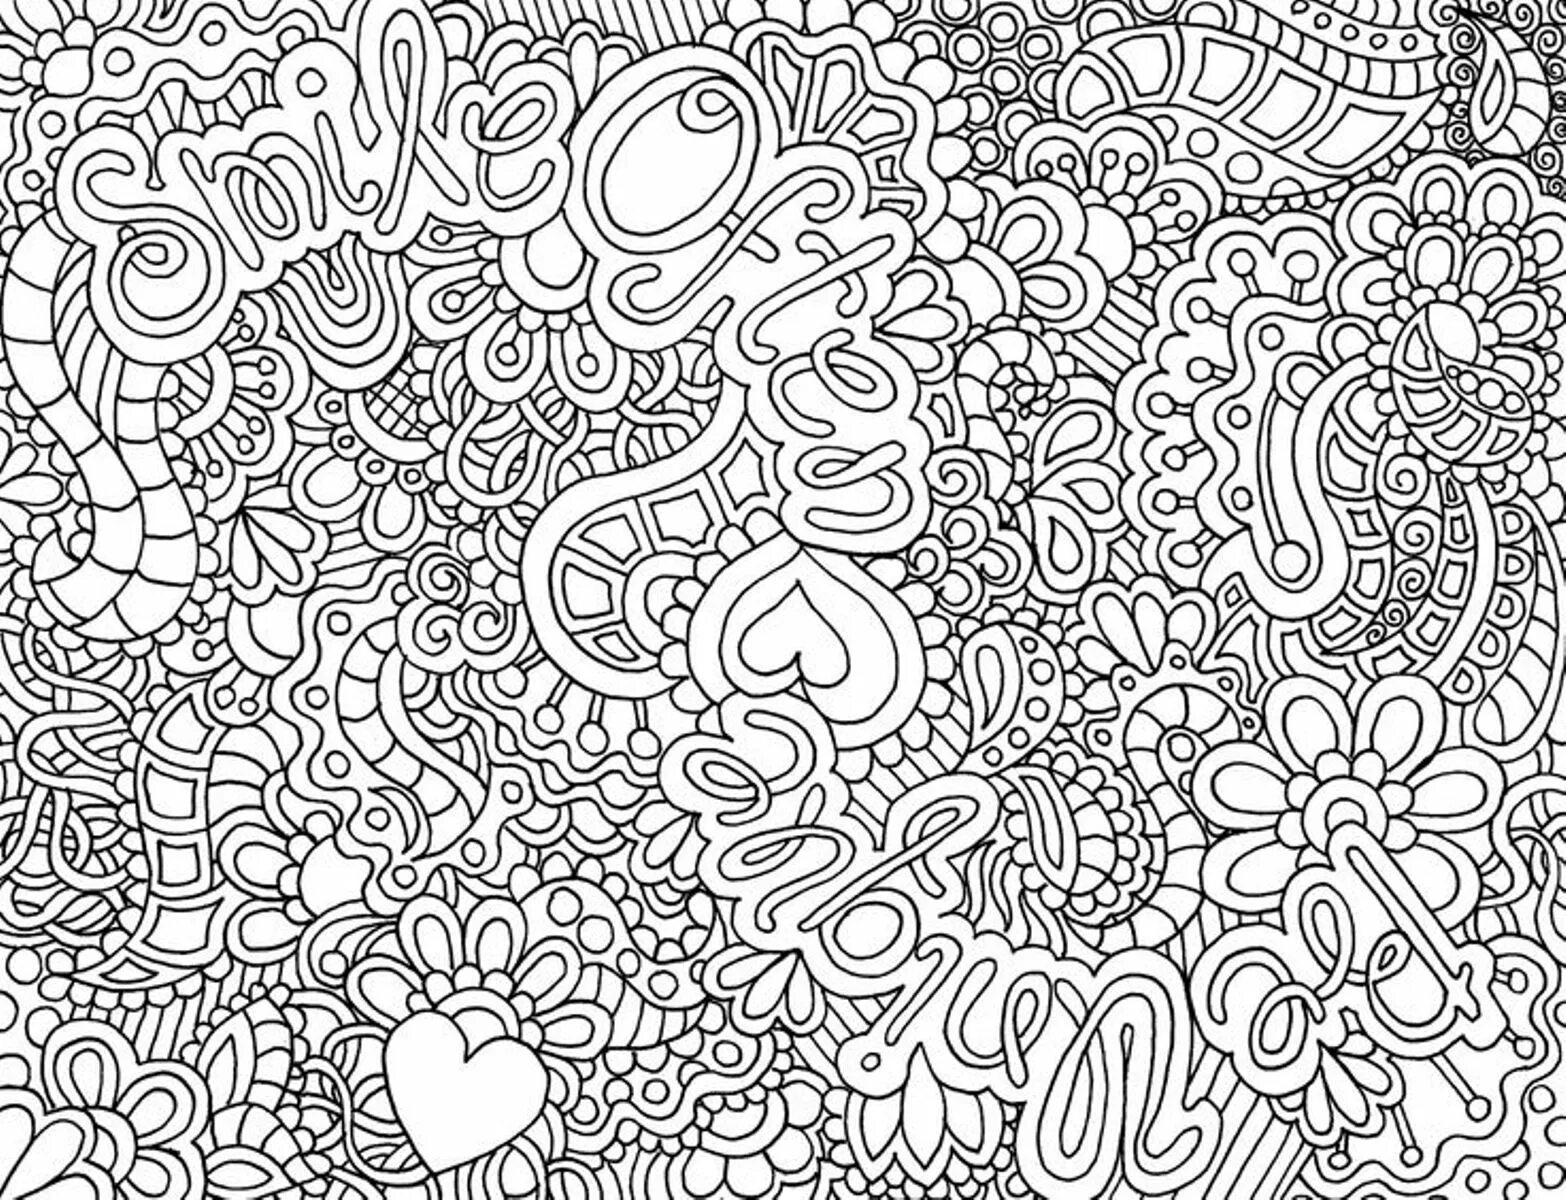 Coloring page intricate patterns - glamorous